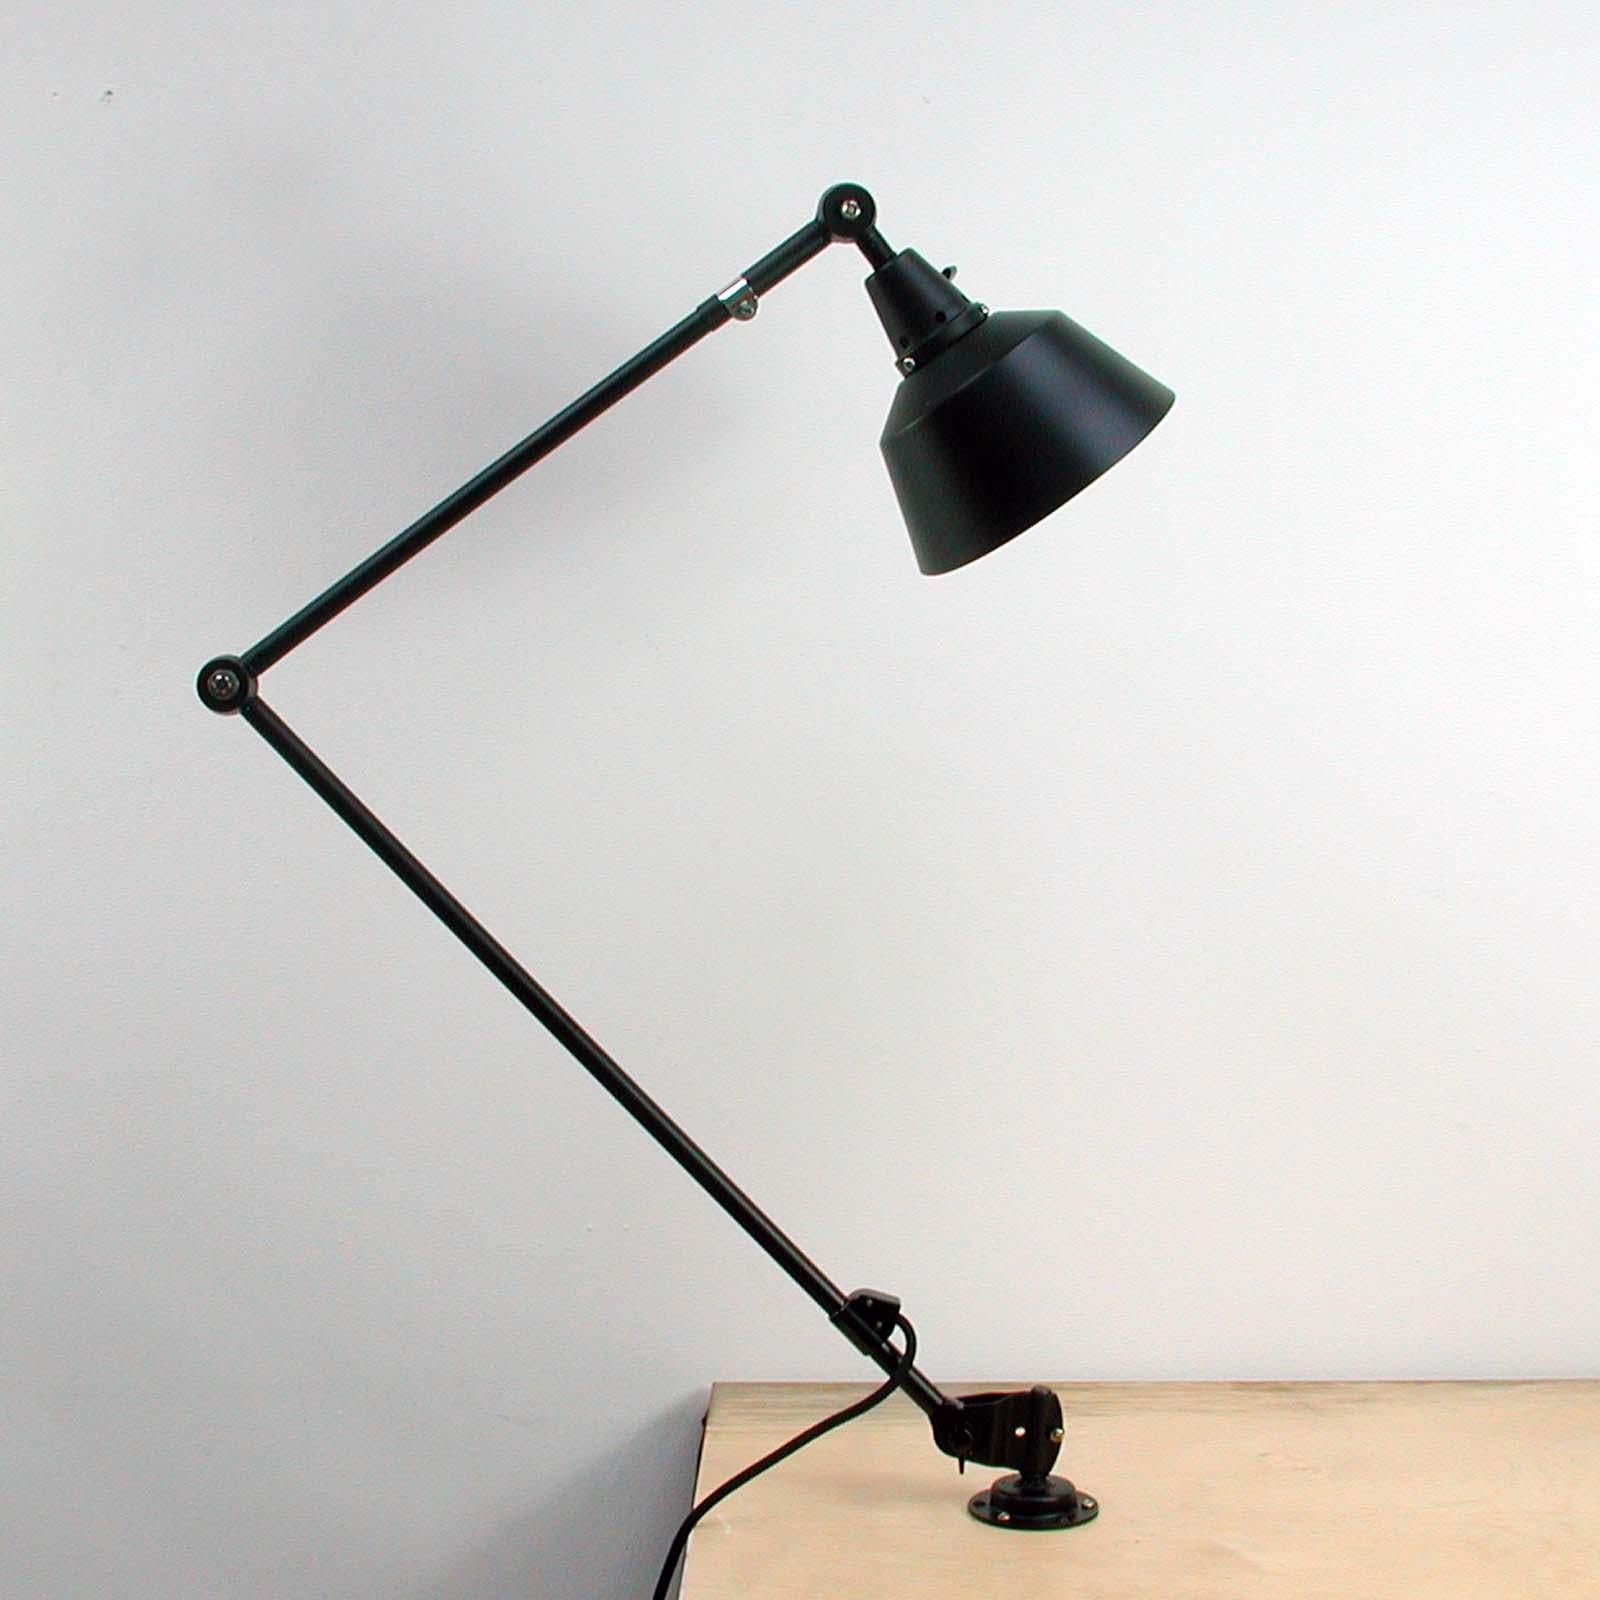 This vintage articulated work lamp was originally designed by Curt Fisher for Midgard / Industriewerke Auma. To improve lighting in industrial workplaces Midgard developed a range of flexibly adjustable lights from the early 1920s, such as this